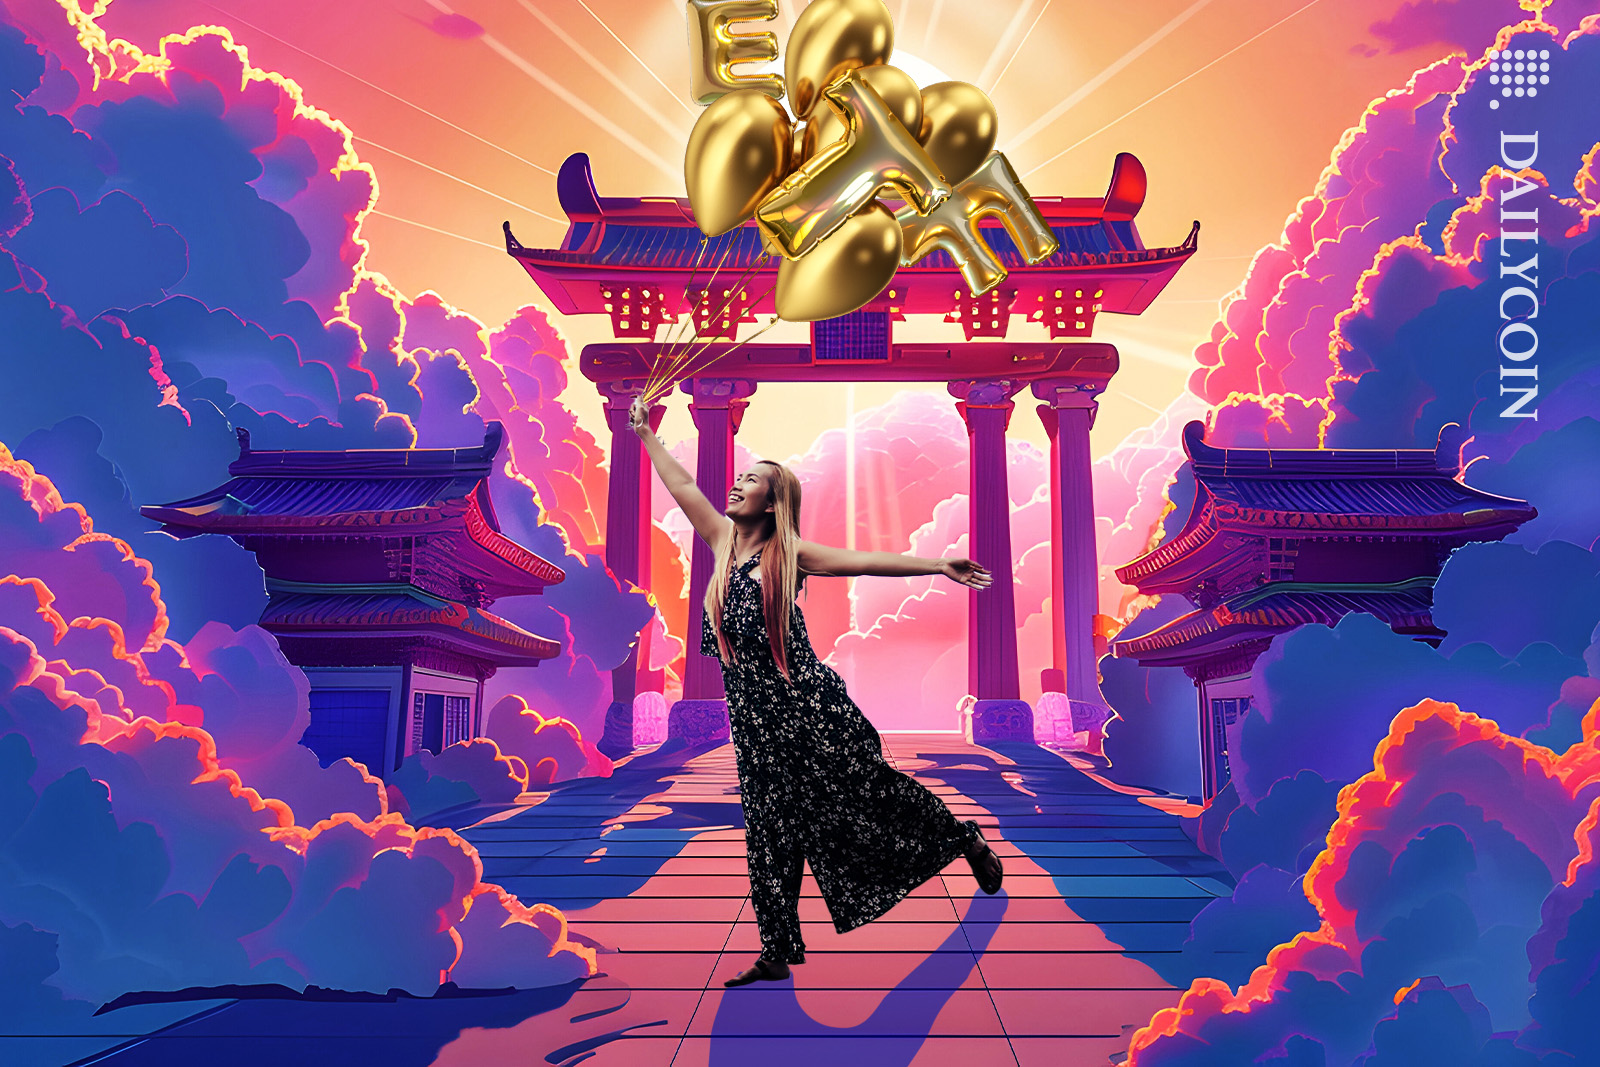 Girl celebrating ETF outside a temple in Asia up in the sky.